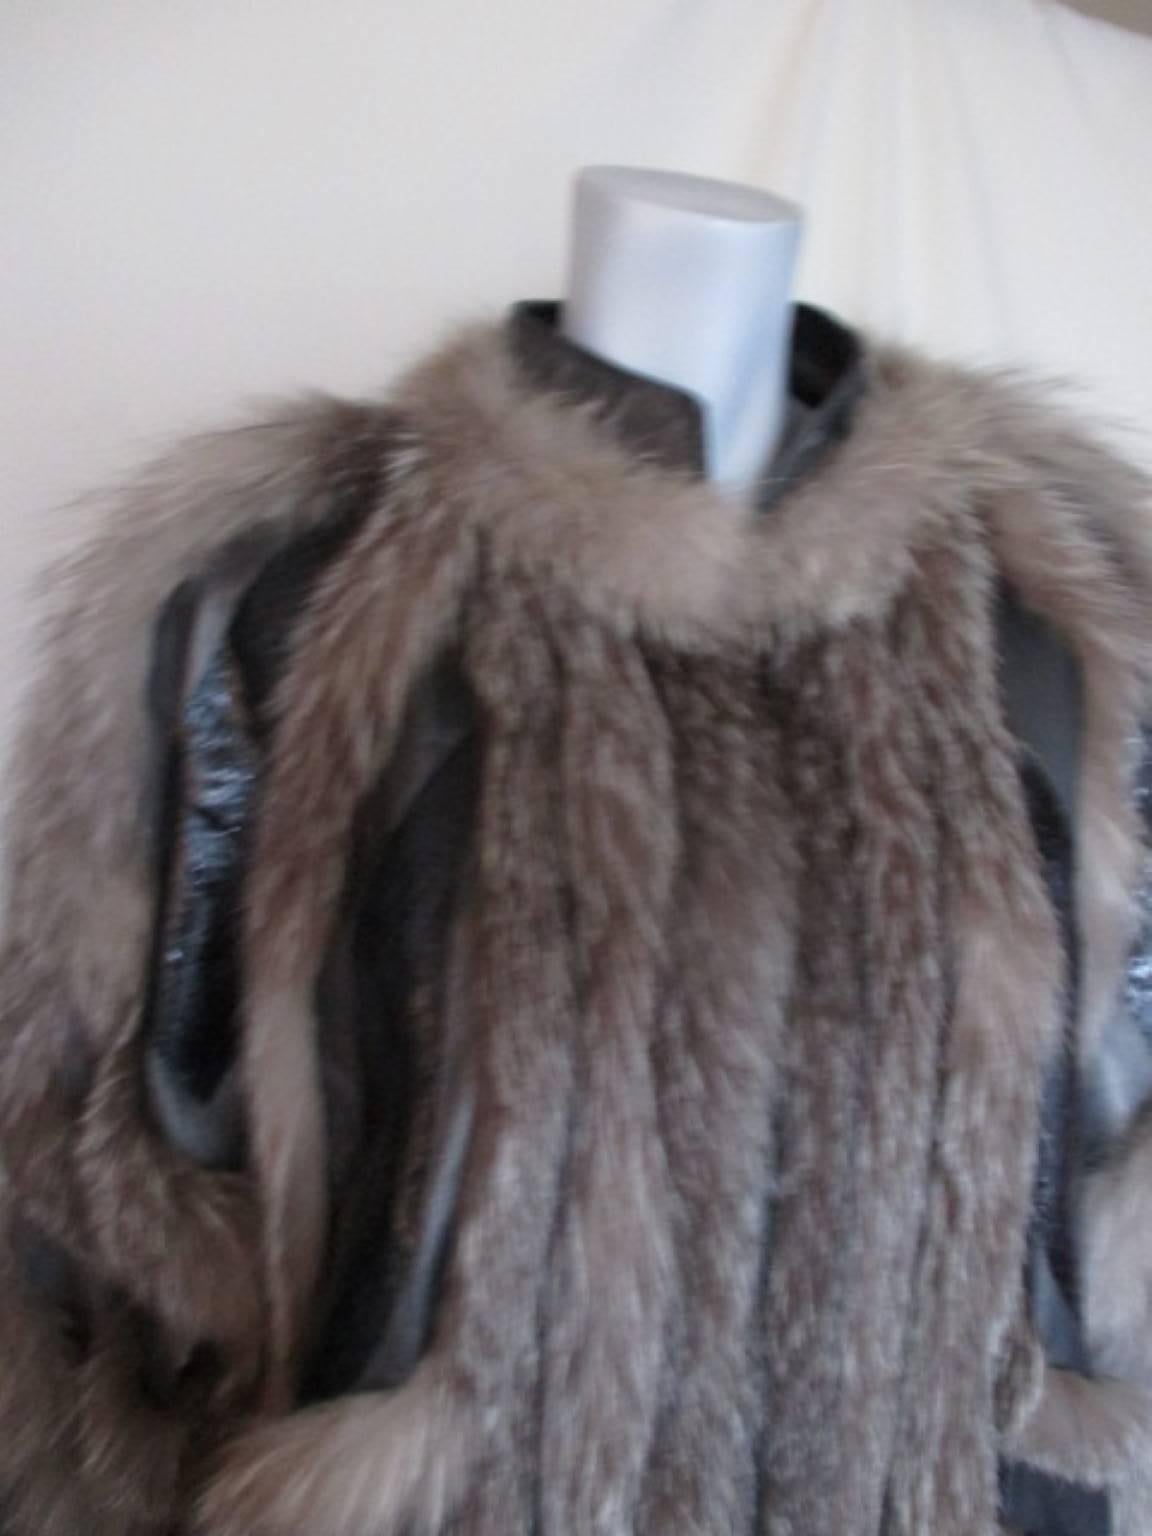 This vintage jacket is very light -weight has 2 pockets, 7 snaps, the jacket has wide sleeves and is made of the soft leather.
The material of the jacket is leather, snake leather details and silver fox fur.
Size fits like a small/medium.
Please